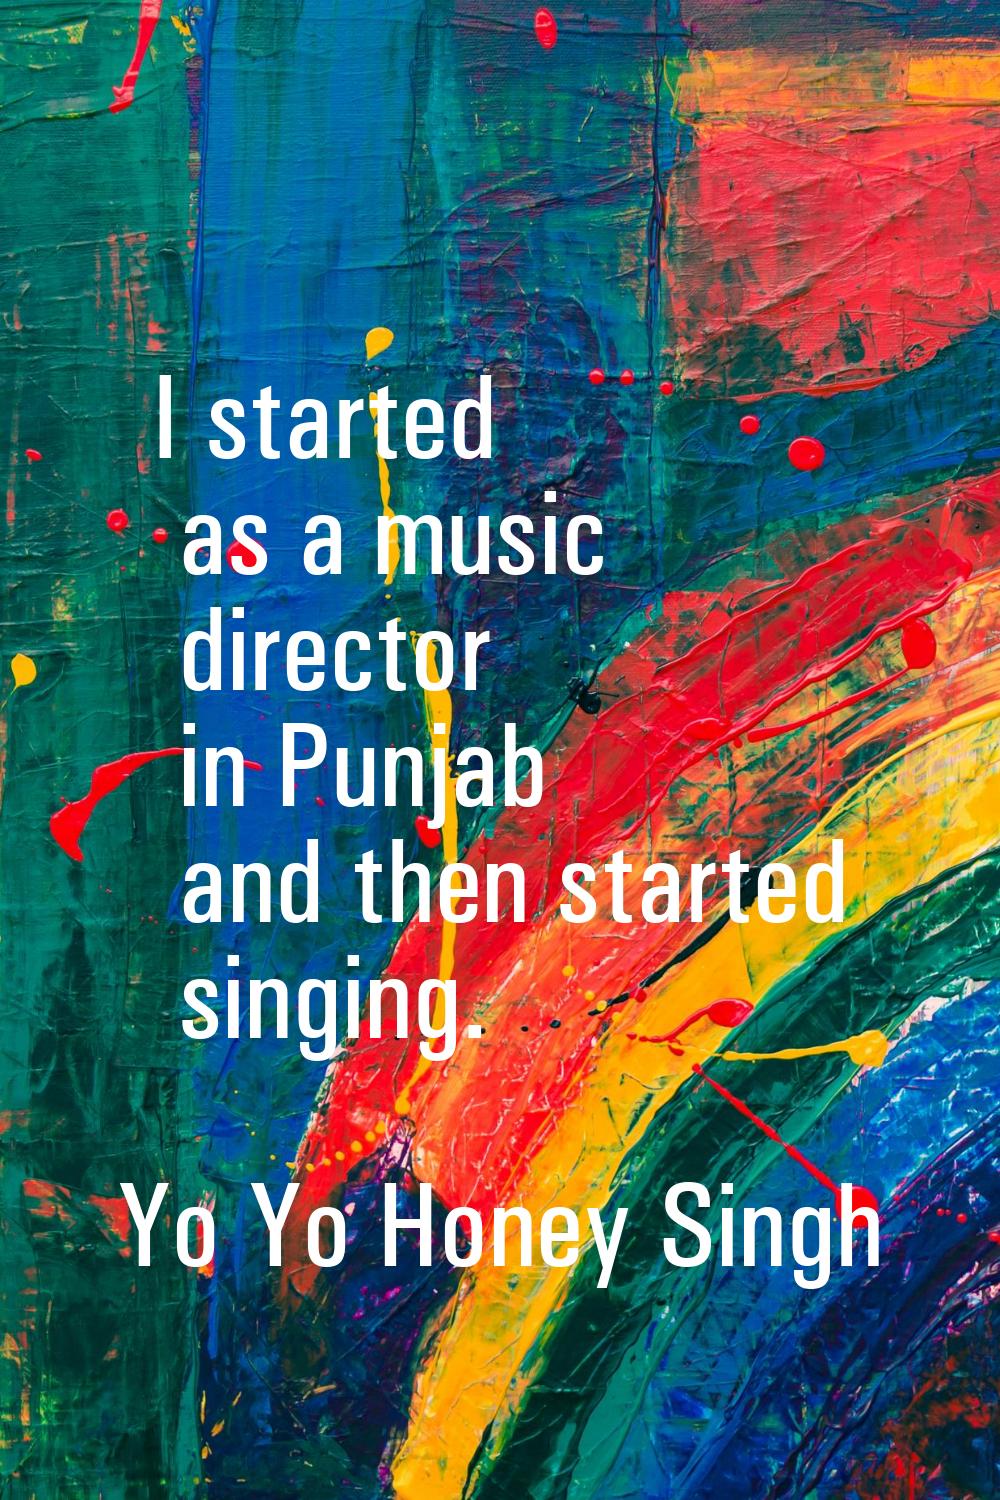 I started as a music director in Punjab and then started singing.